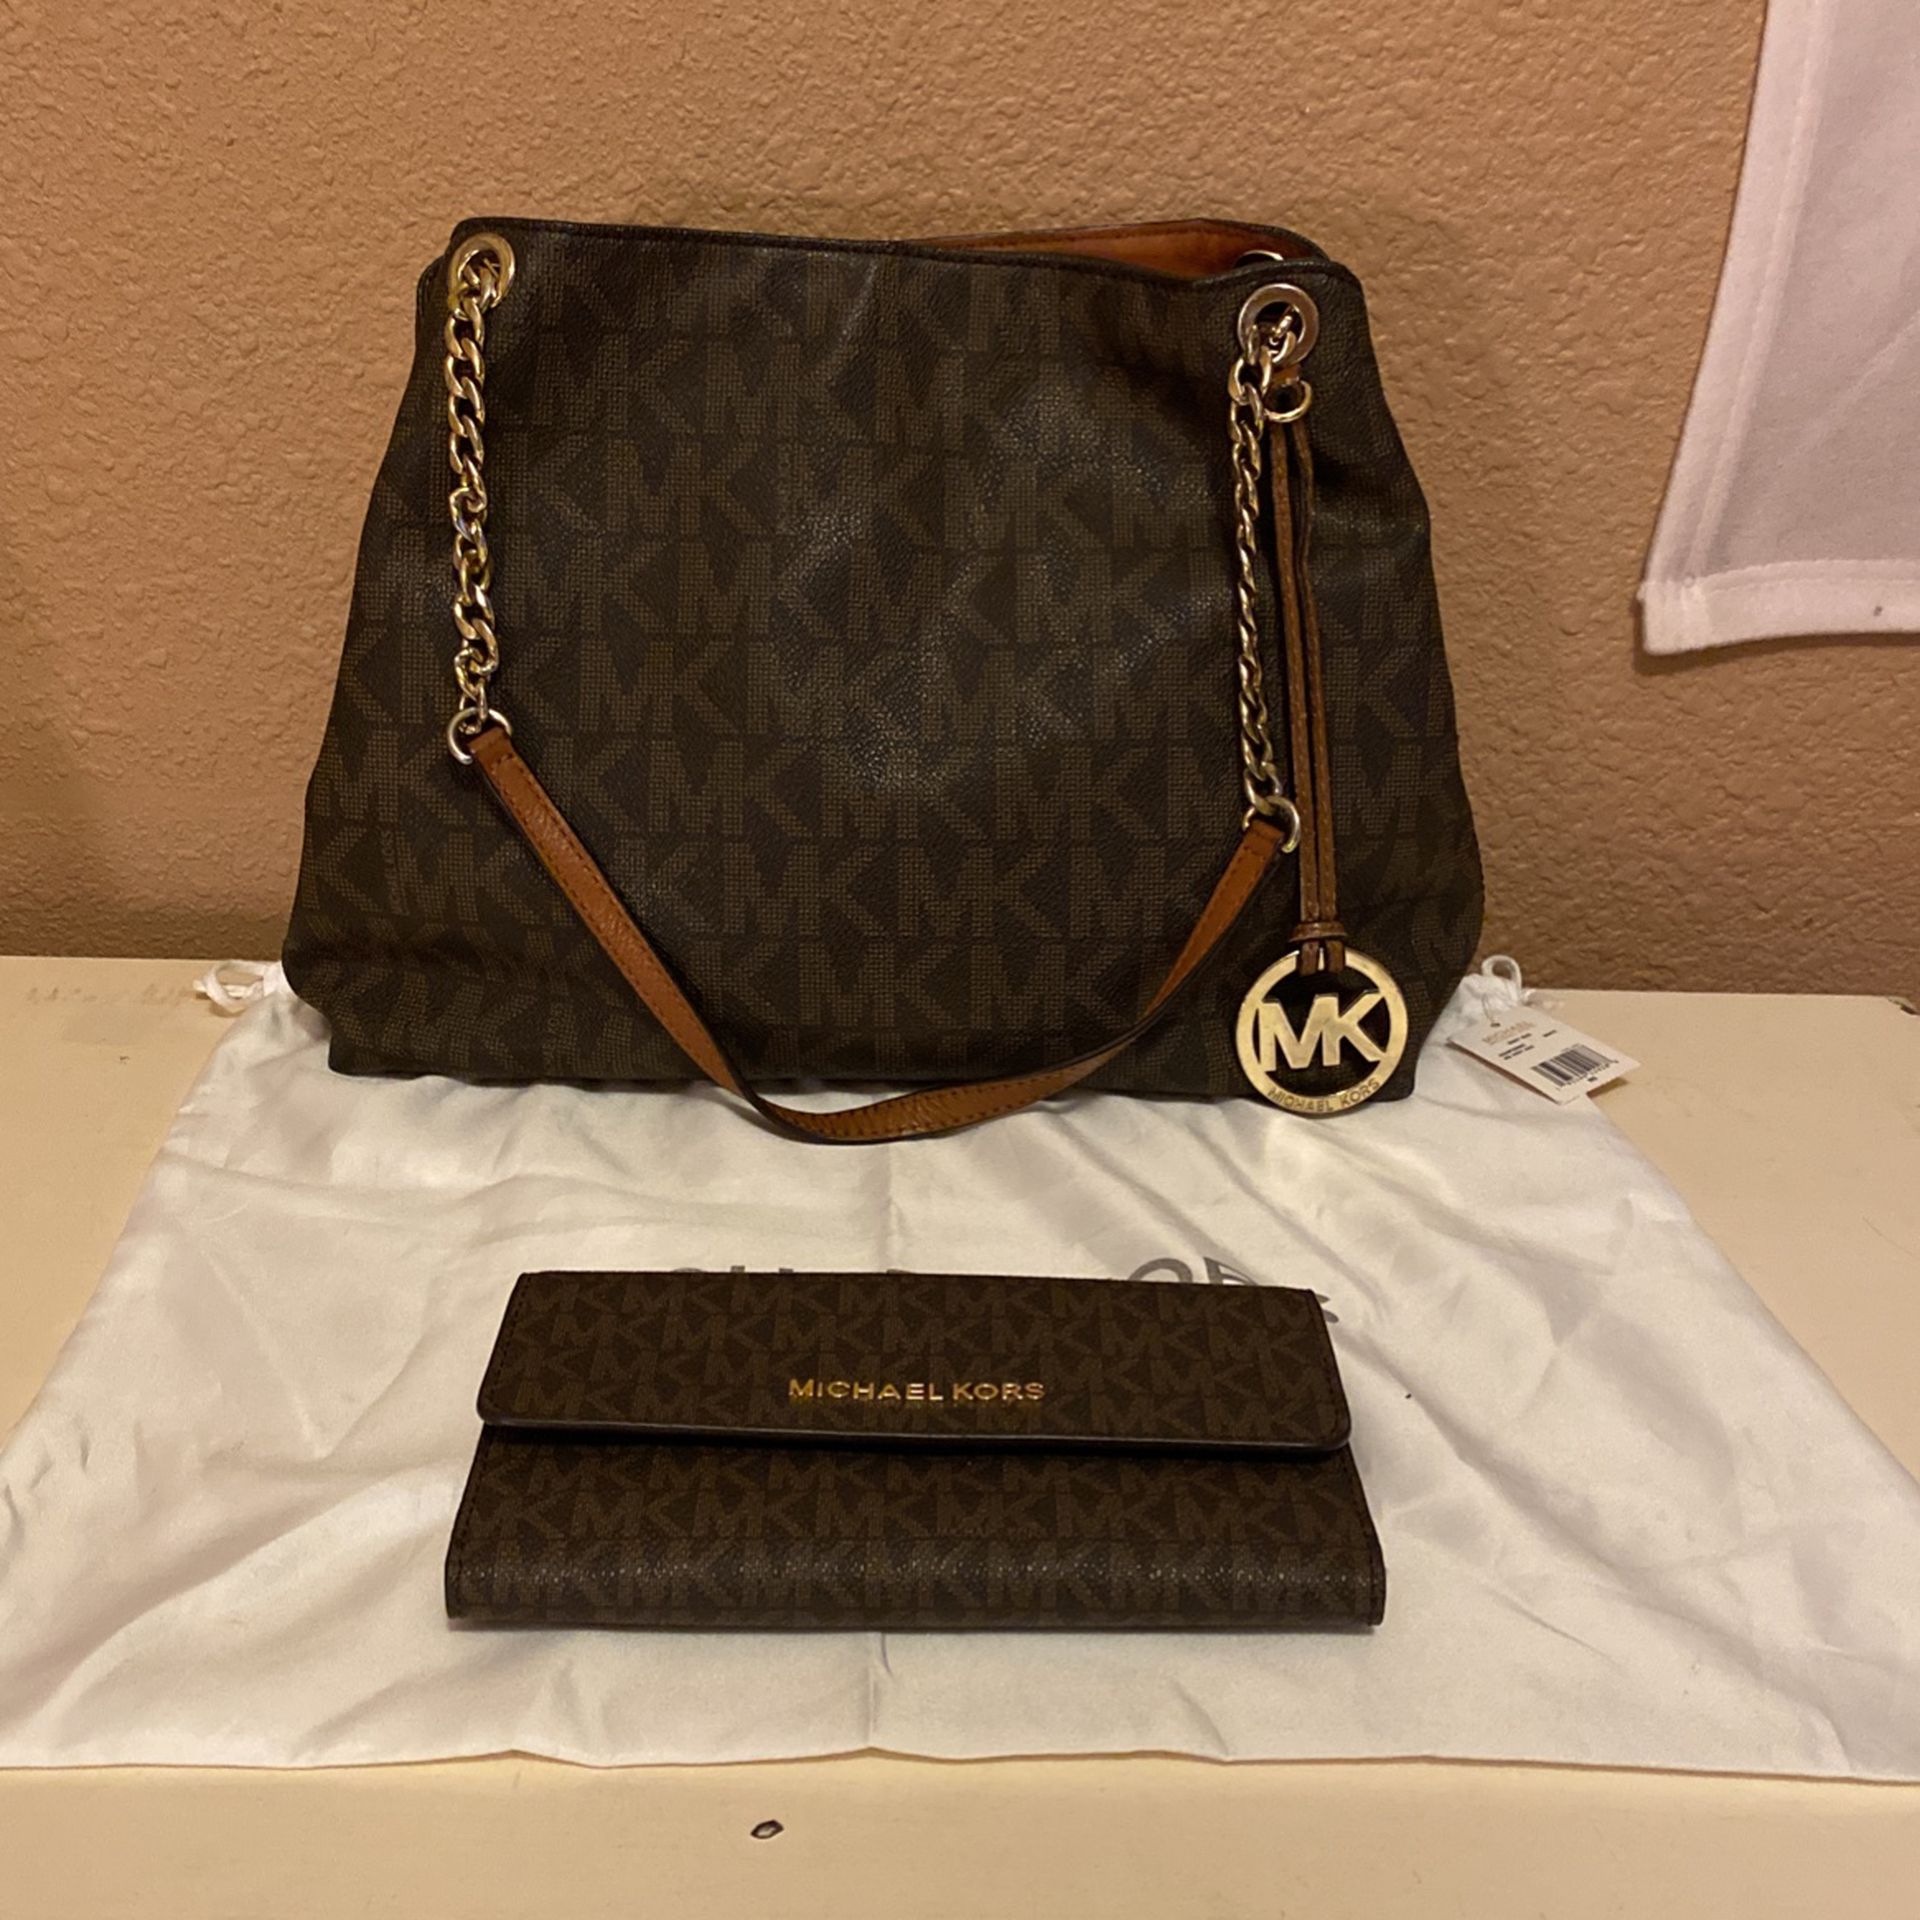 Michael Kors Authentic Signature Purse And New Wallet And New Dust Bag 3 Compartments Pre Loved Purse $125 The Set C My Other Purses Ty